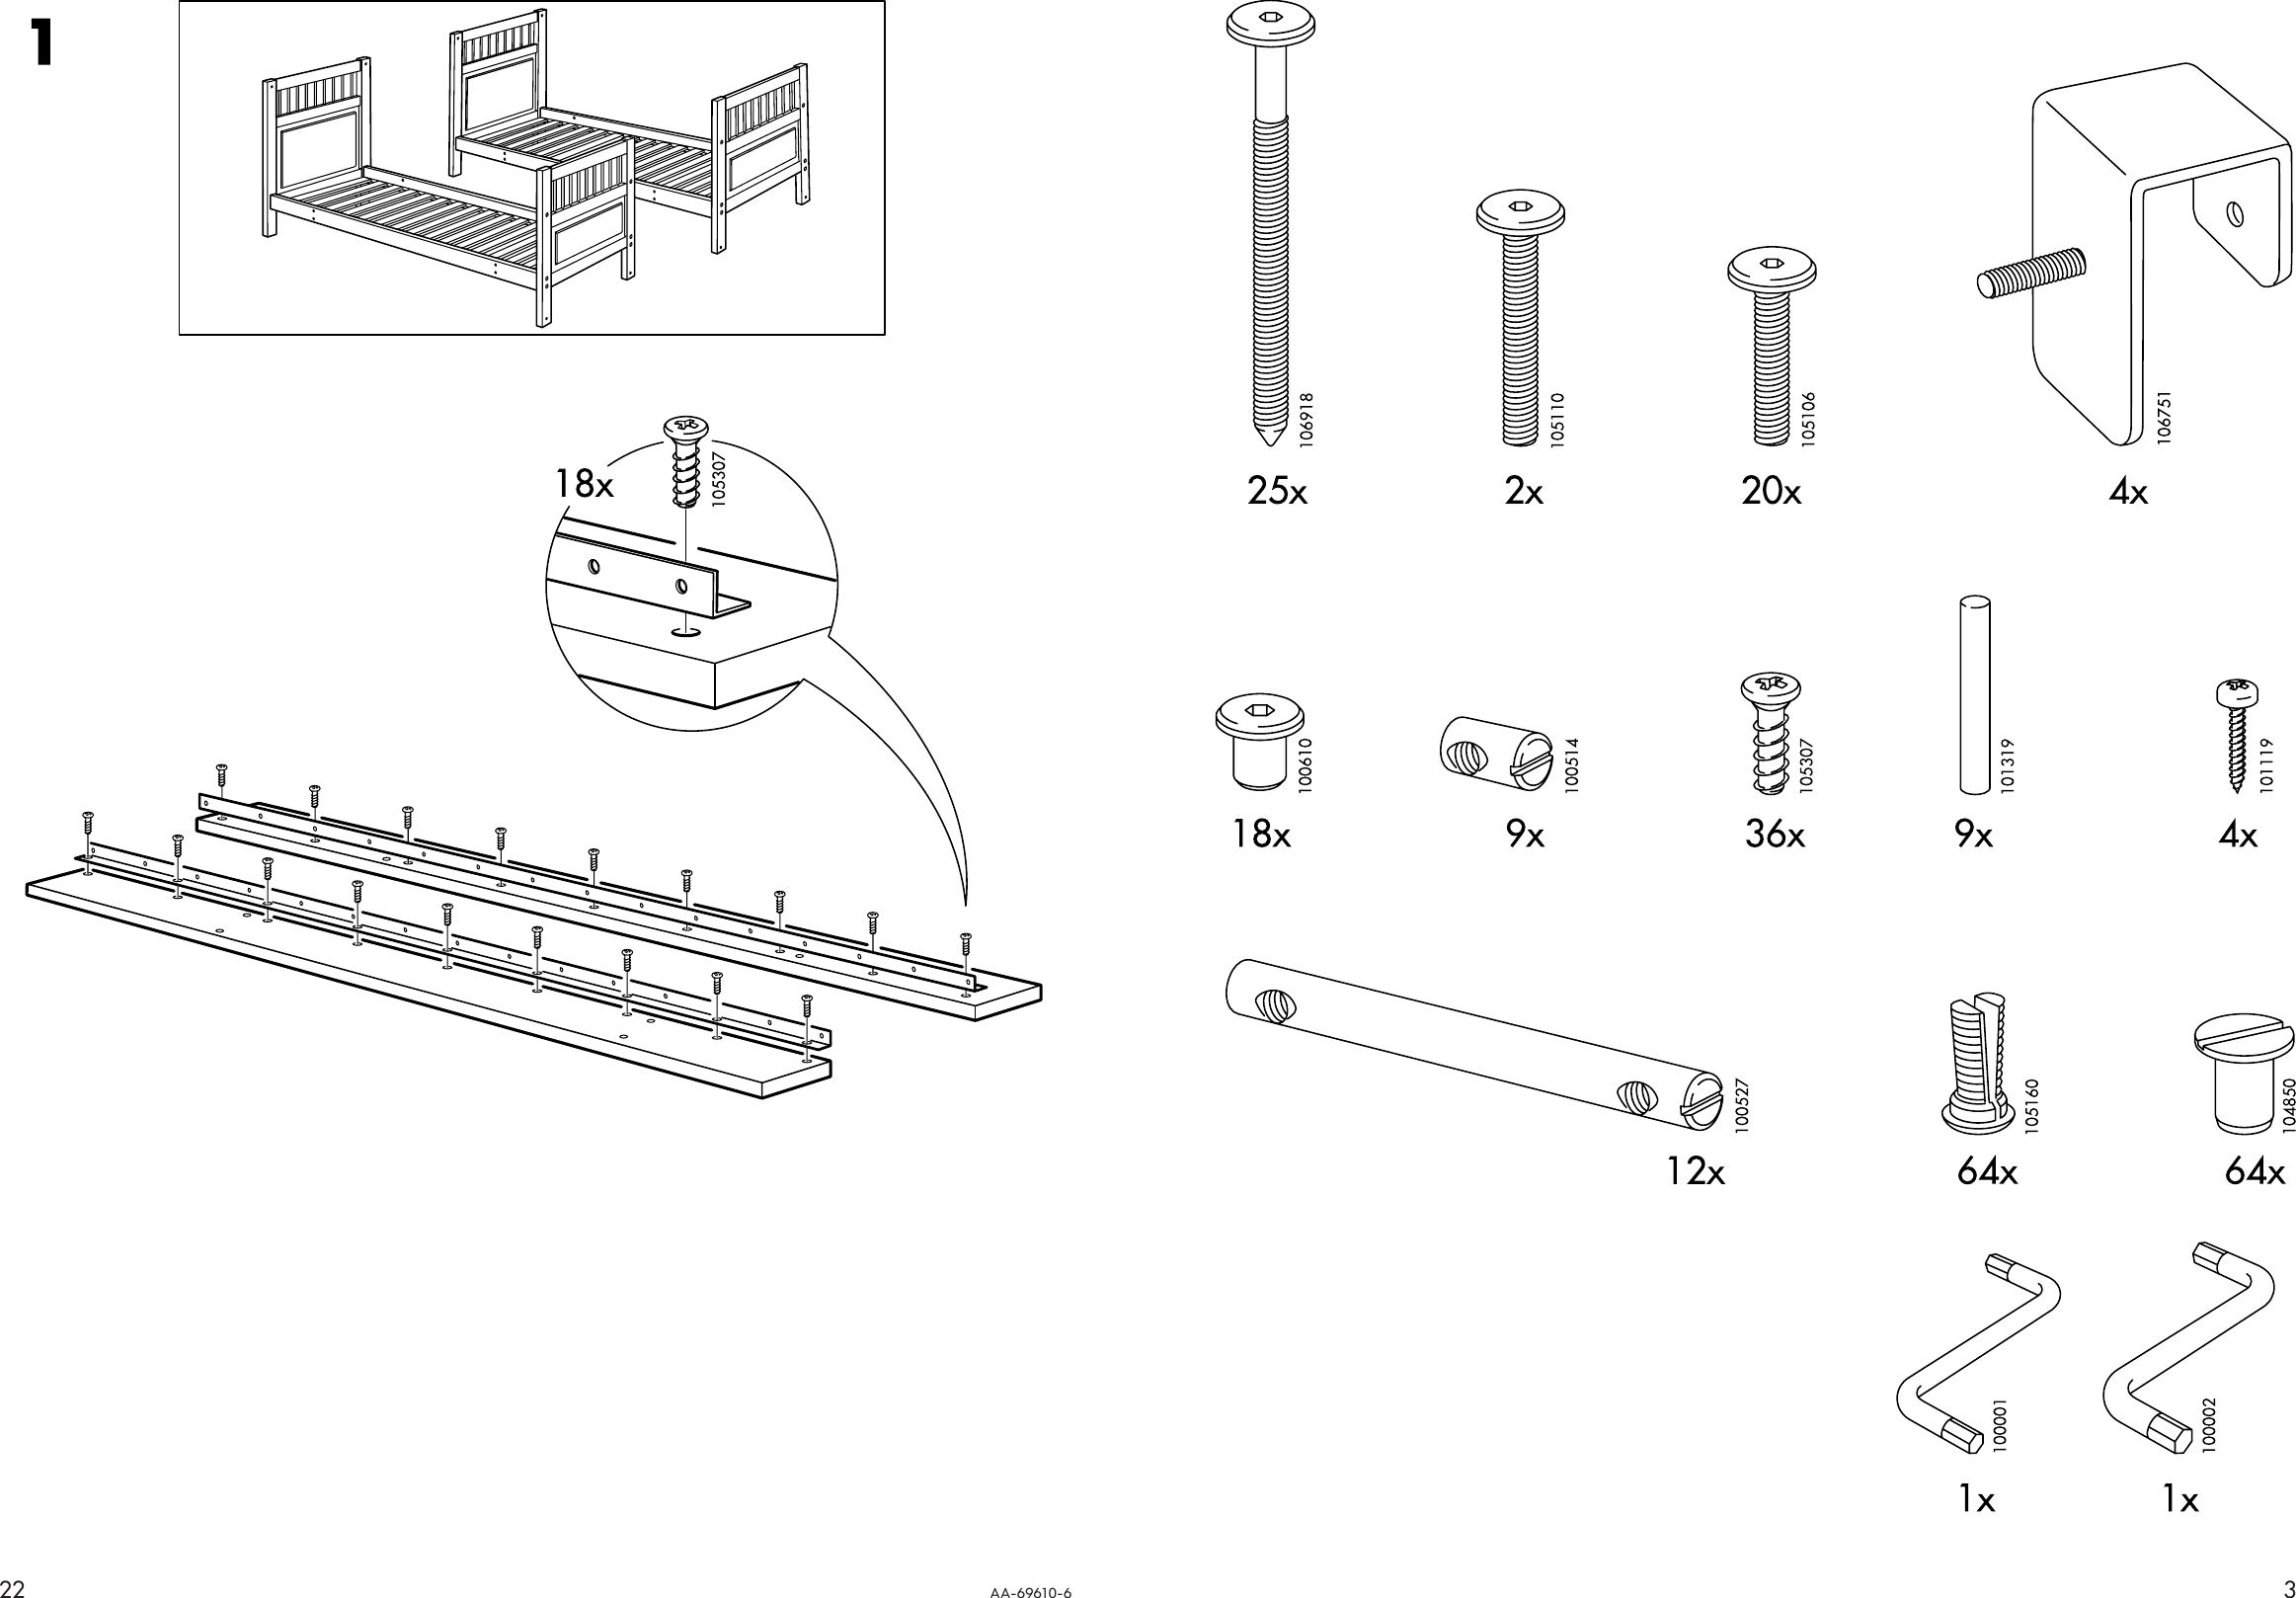 Hemnes Bed Instructions, Ikea Hemnes King Size Bed Assembly Instructions